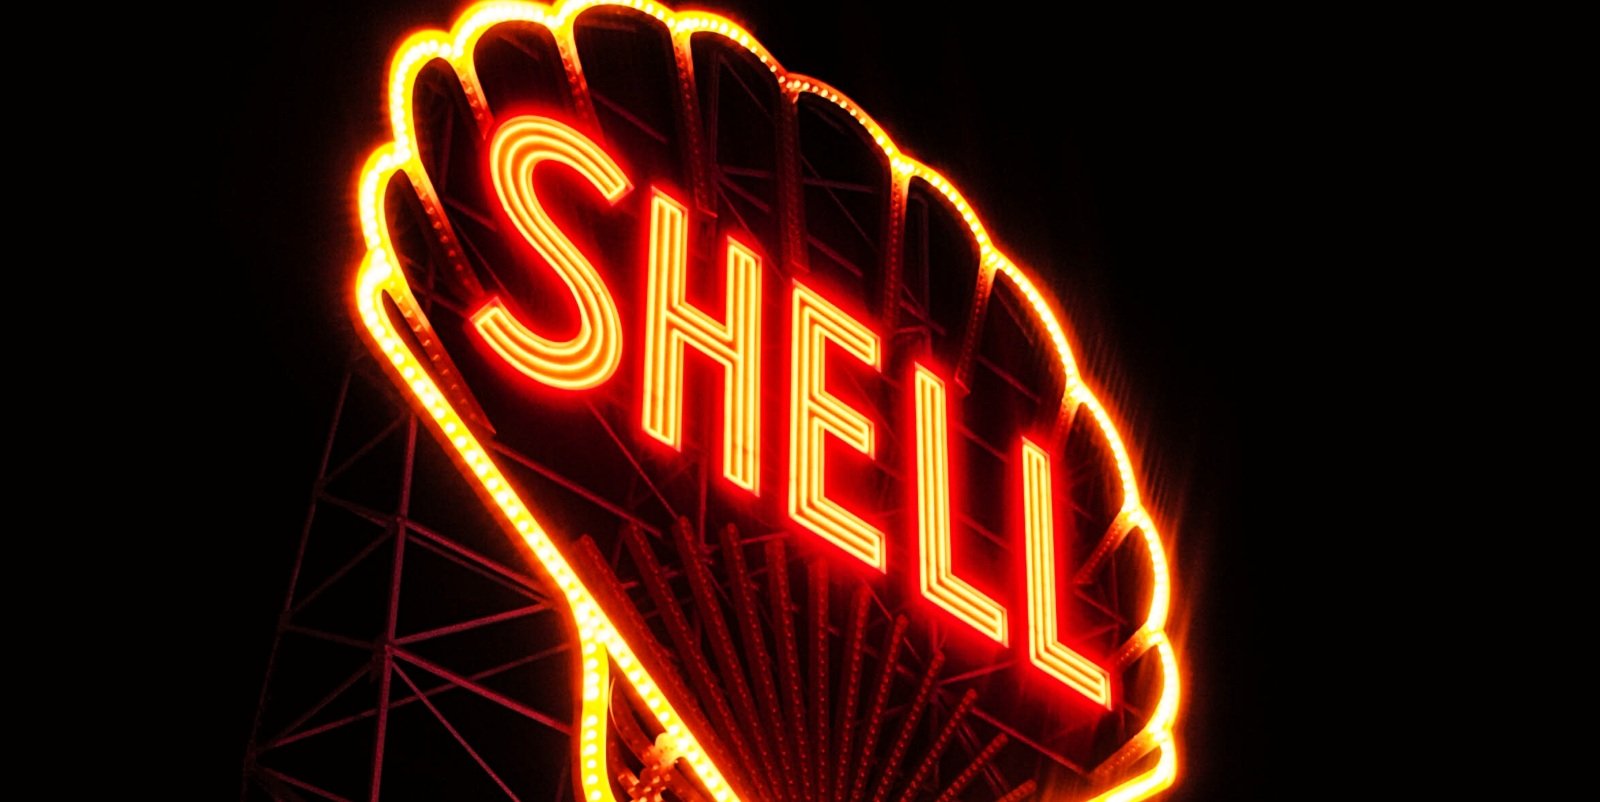 Energy giant Shell discloses data breach after Accellion hack